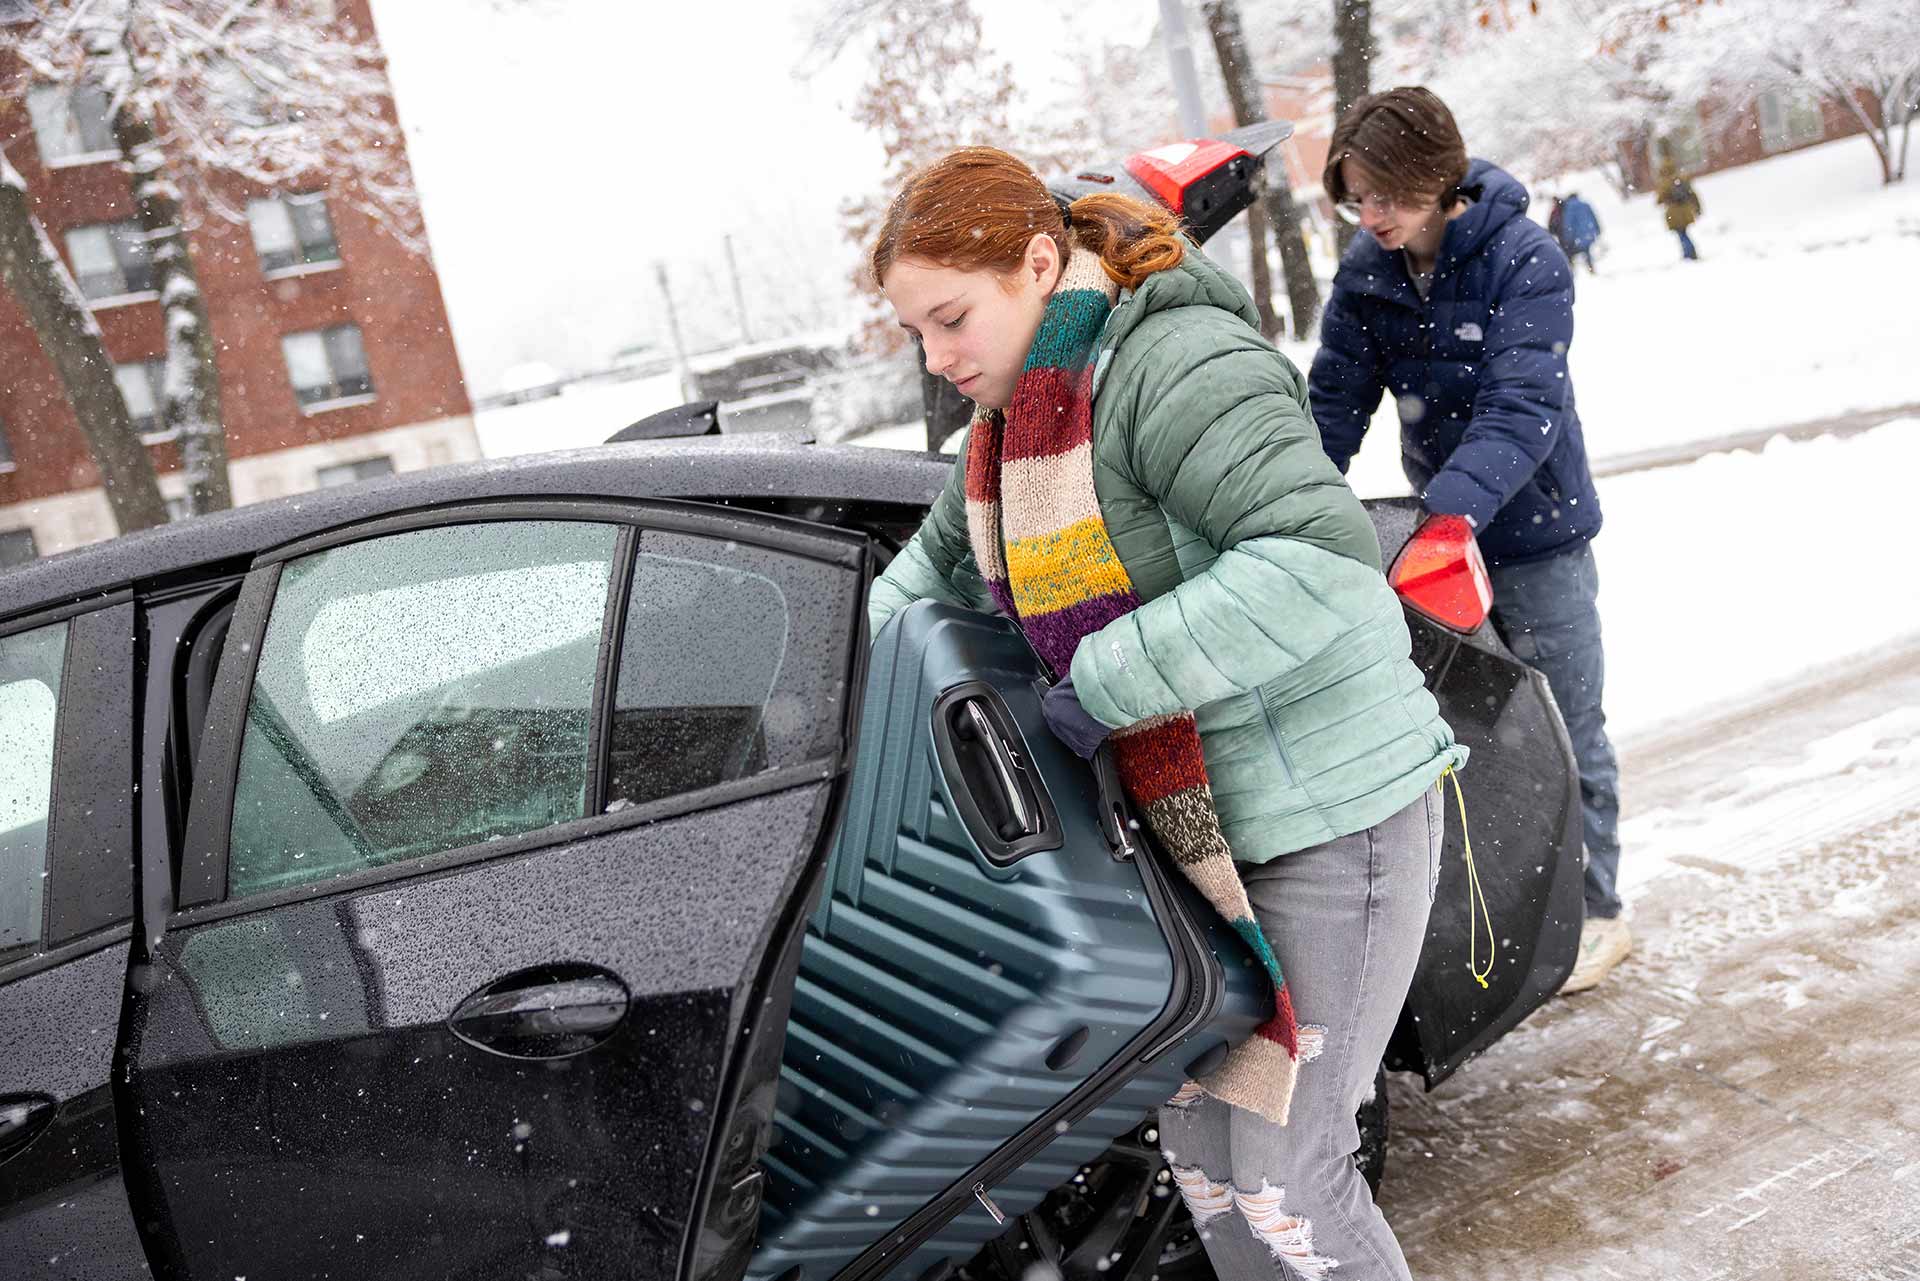 A student pulls a suitcase from car